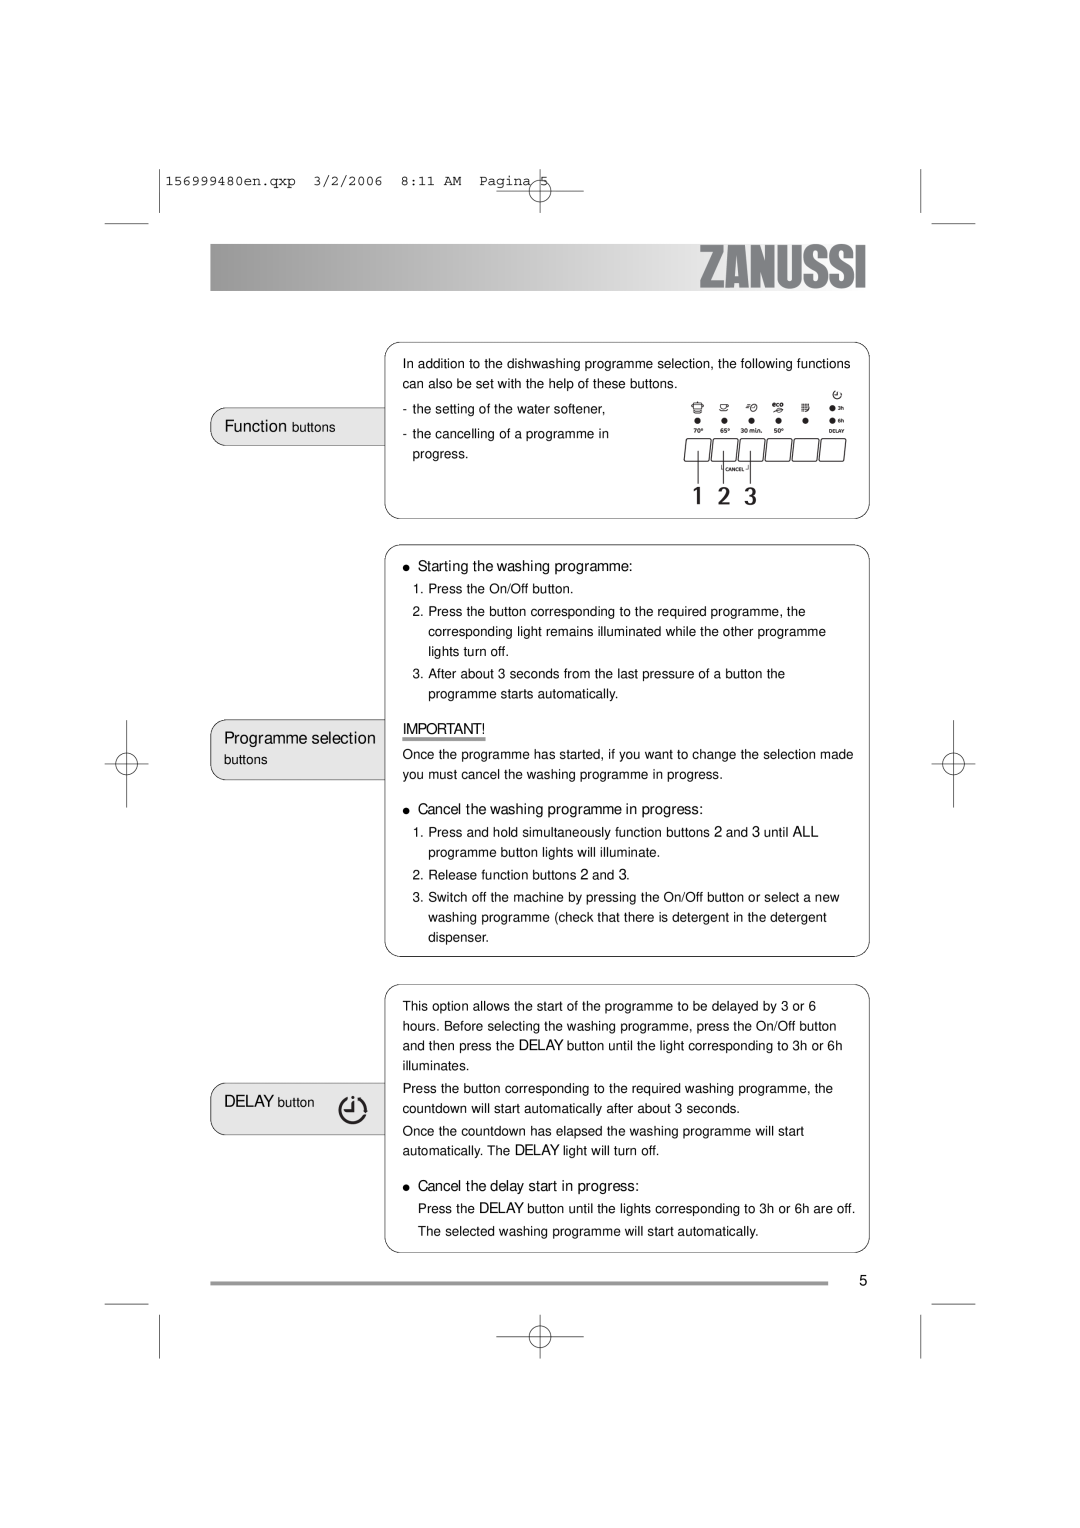 Zanussi ZDF311 user manual Function buttons, DELAY button, Programme selection, Starting the washing programme 